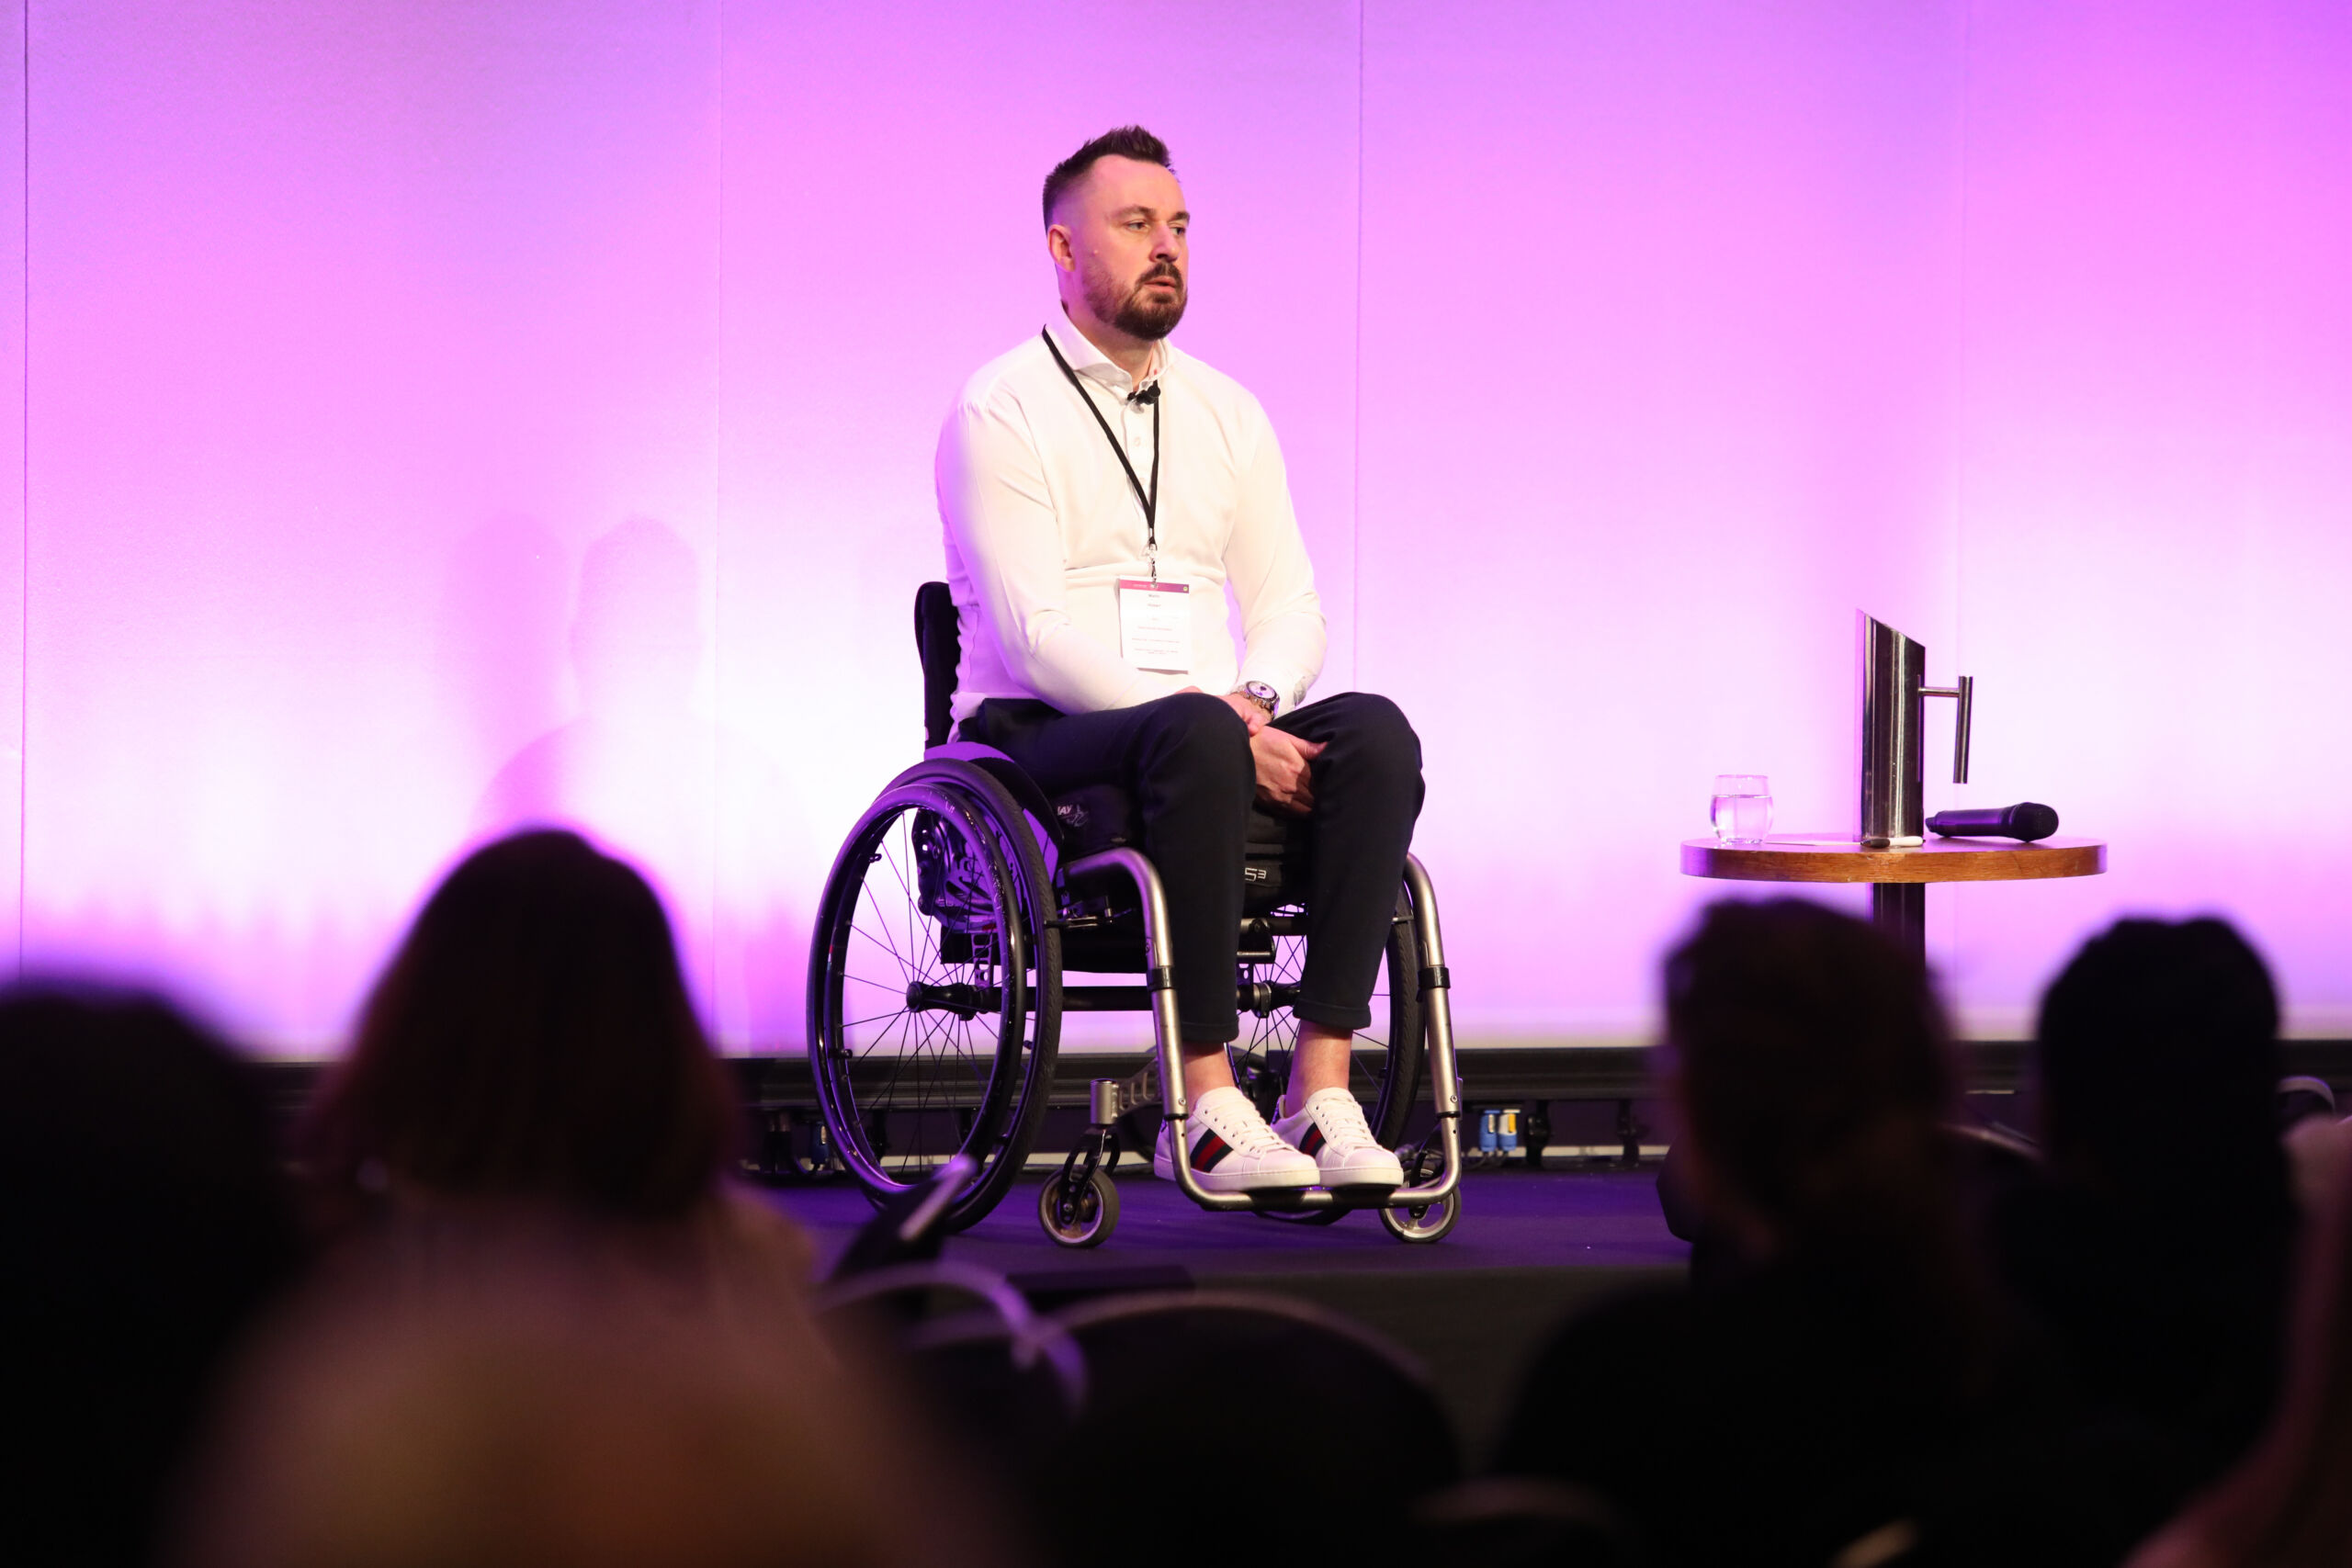 A white man in a white shirt with dark hair and beards sits in a wheel chair on stage at the Greater Manchester Cancer Conference. Heads from the audience can be seen in silhouette